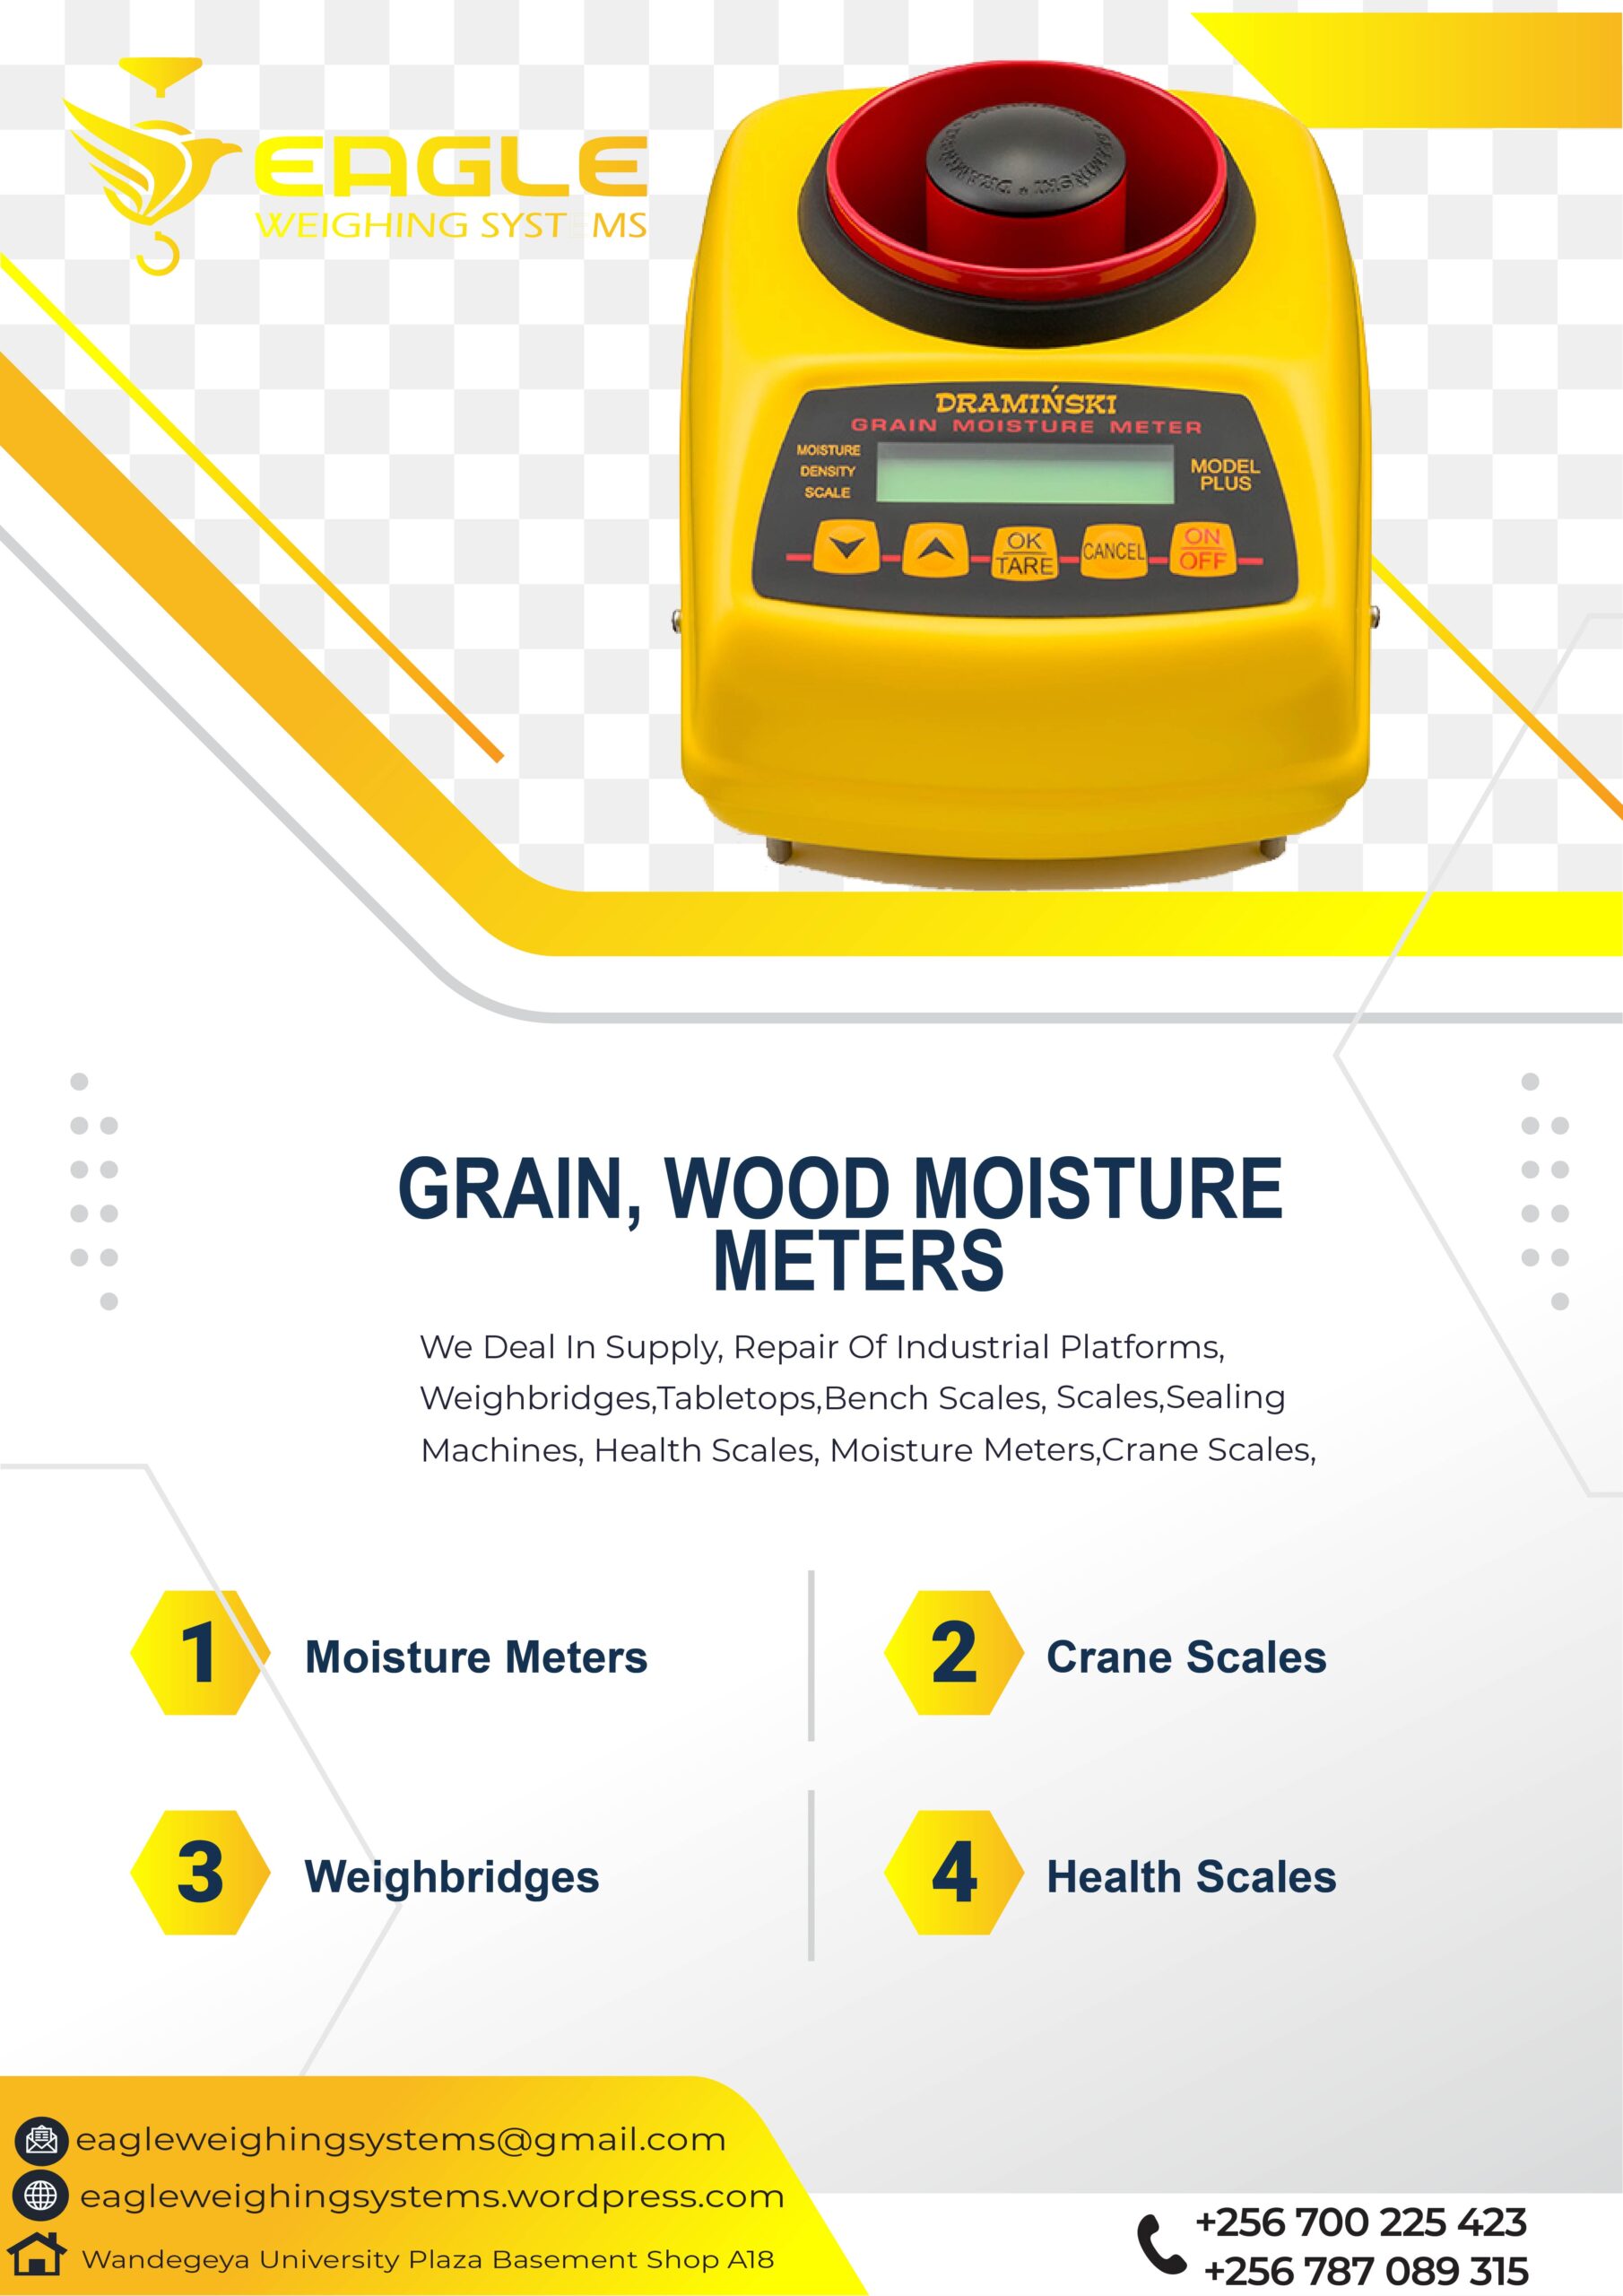 Sorghum Moisture Meter In Uganda offers a range of high-quality moisture meters designed specifically for measuring the moisture content of sorghum and other grains.